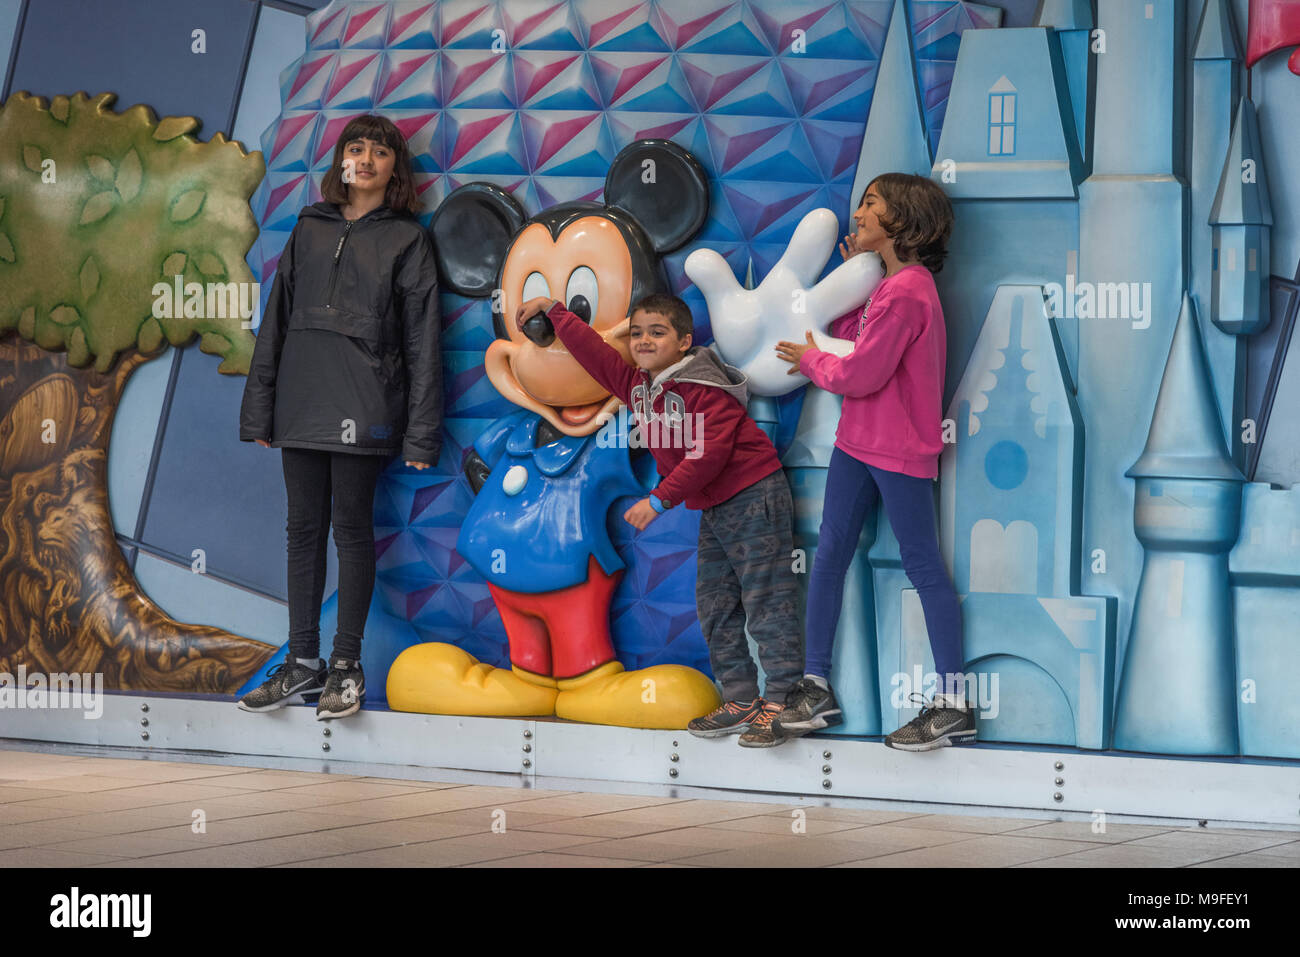 Children posing with a Micky Mouse statue located within the terminal at Orlando International Airport Florida USA. Stock Photo